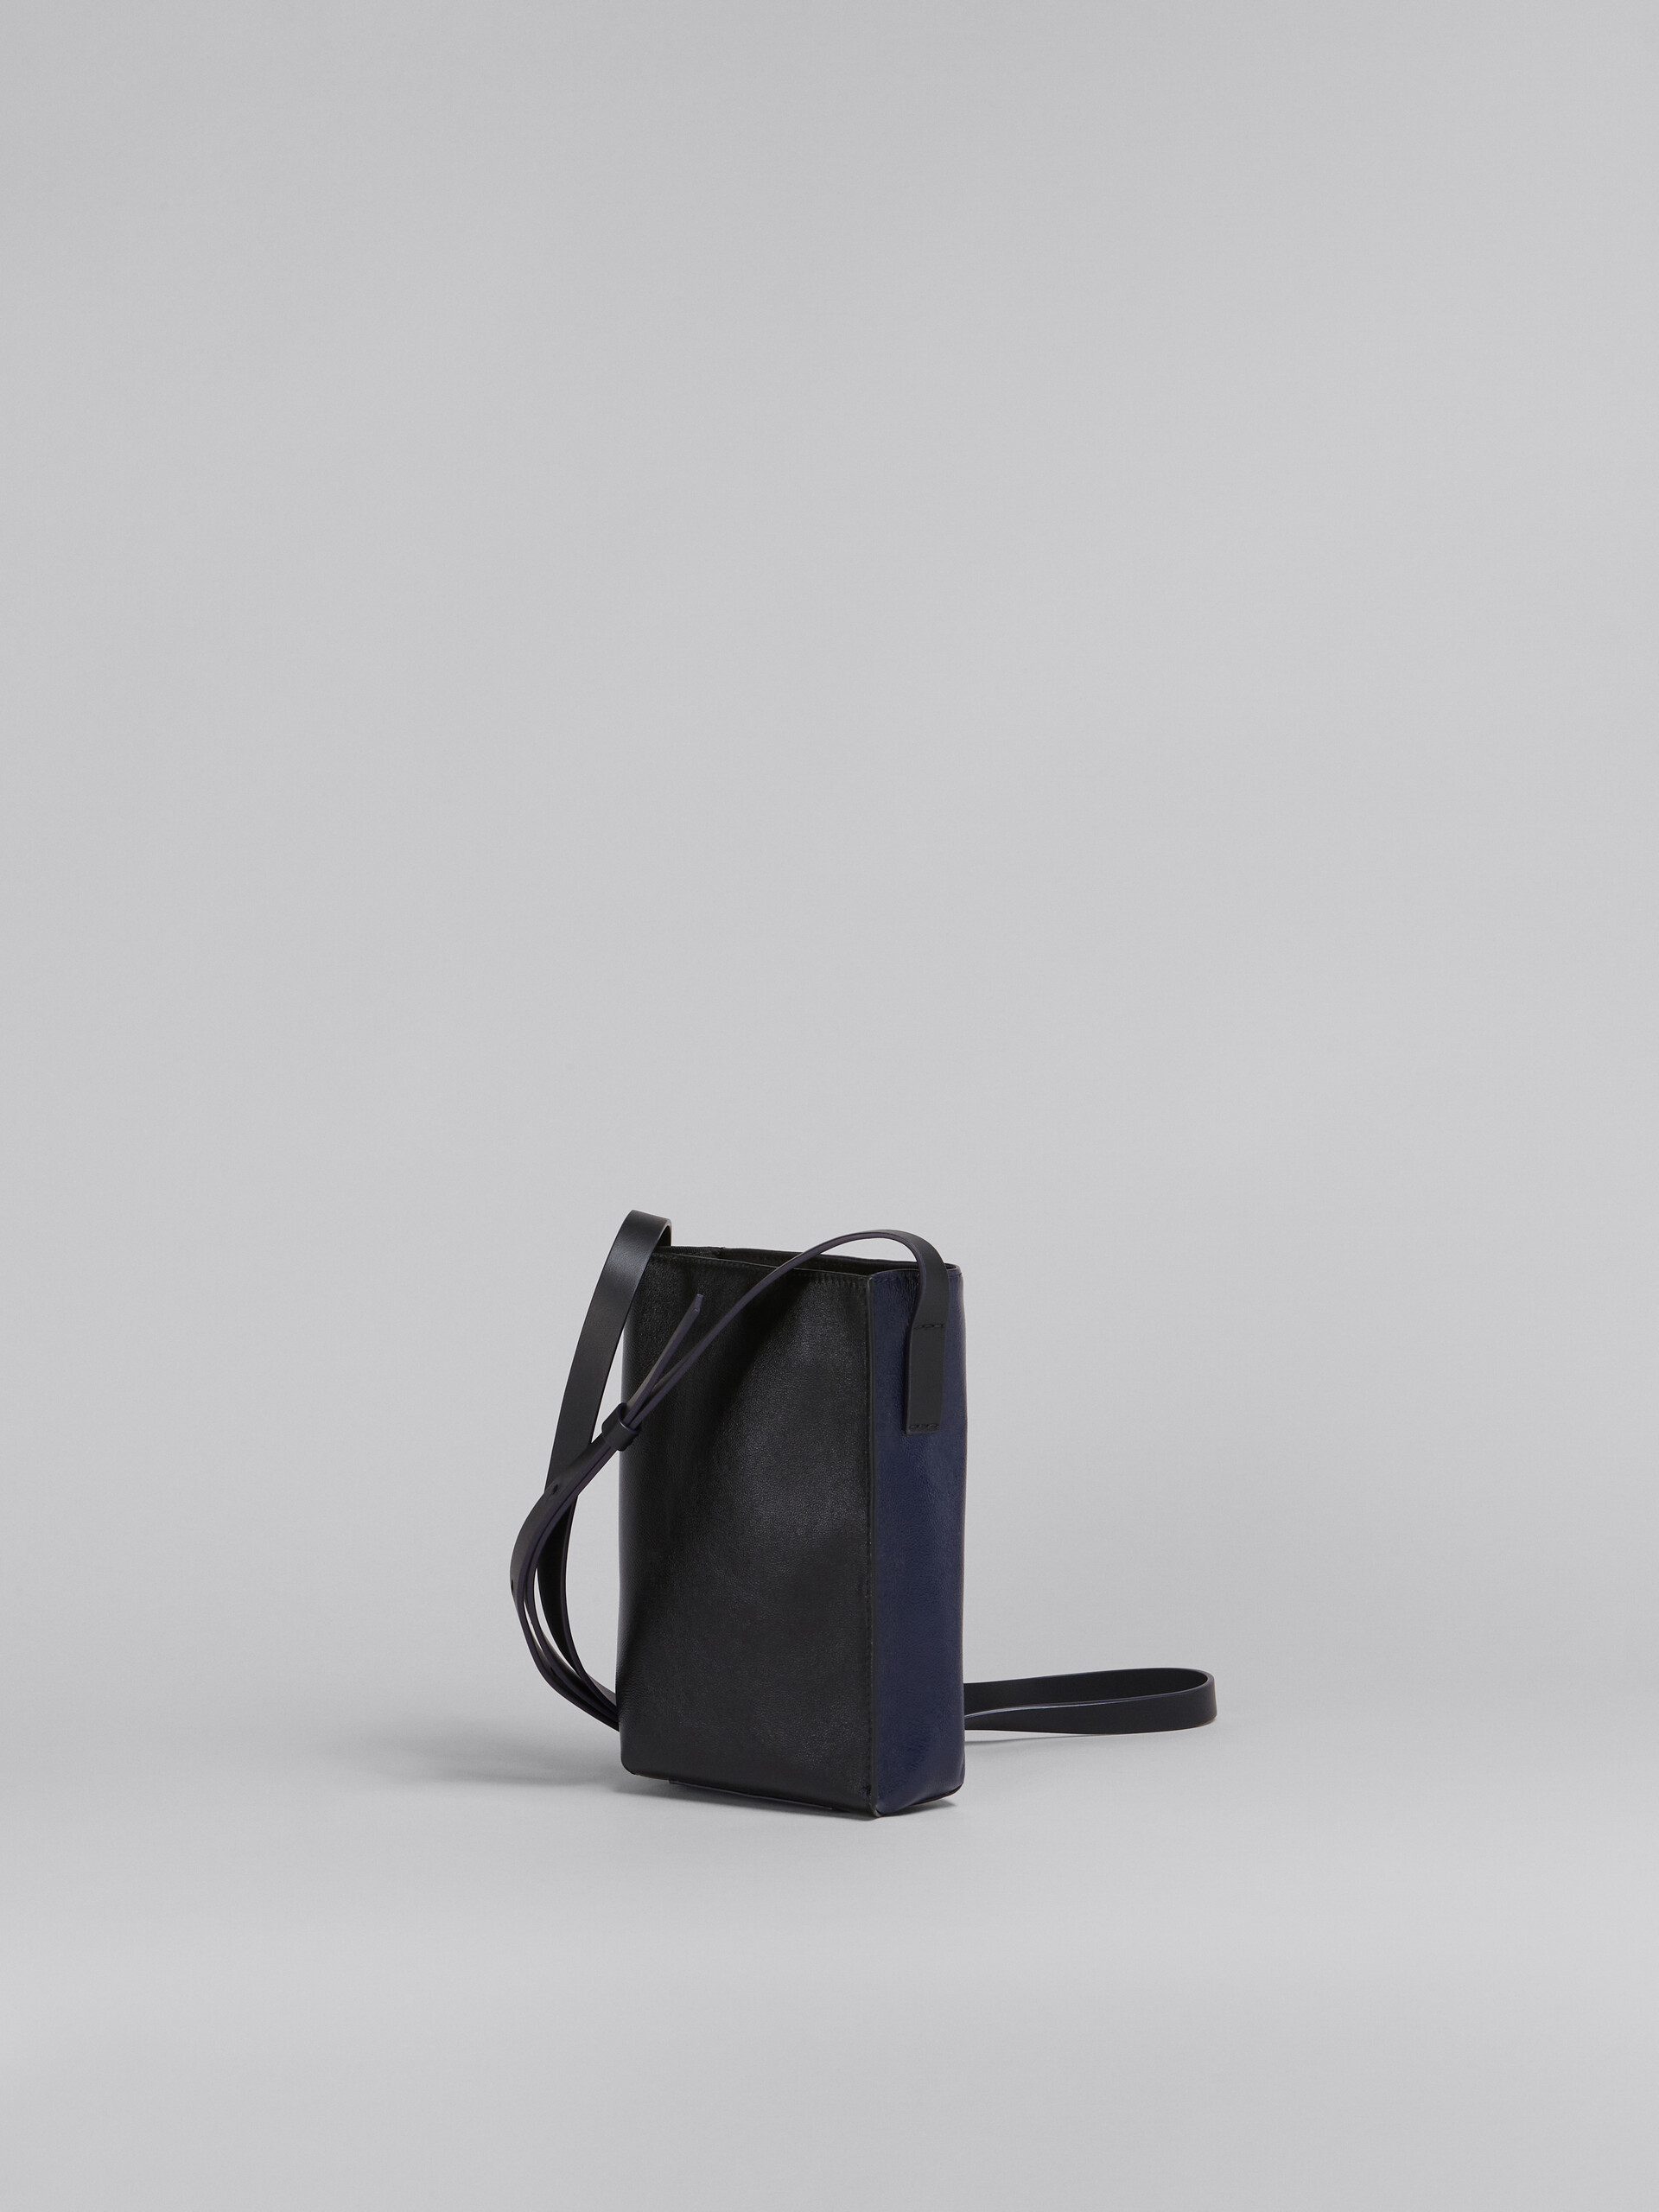 MUSEO SOFT small bag in blue and black shiny leather - Shoulder Bag - Image 3